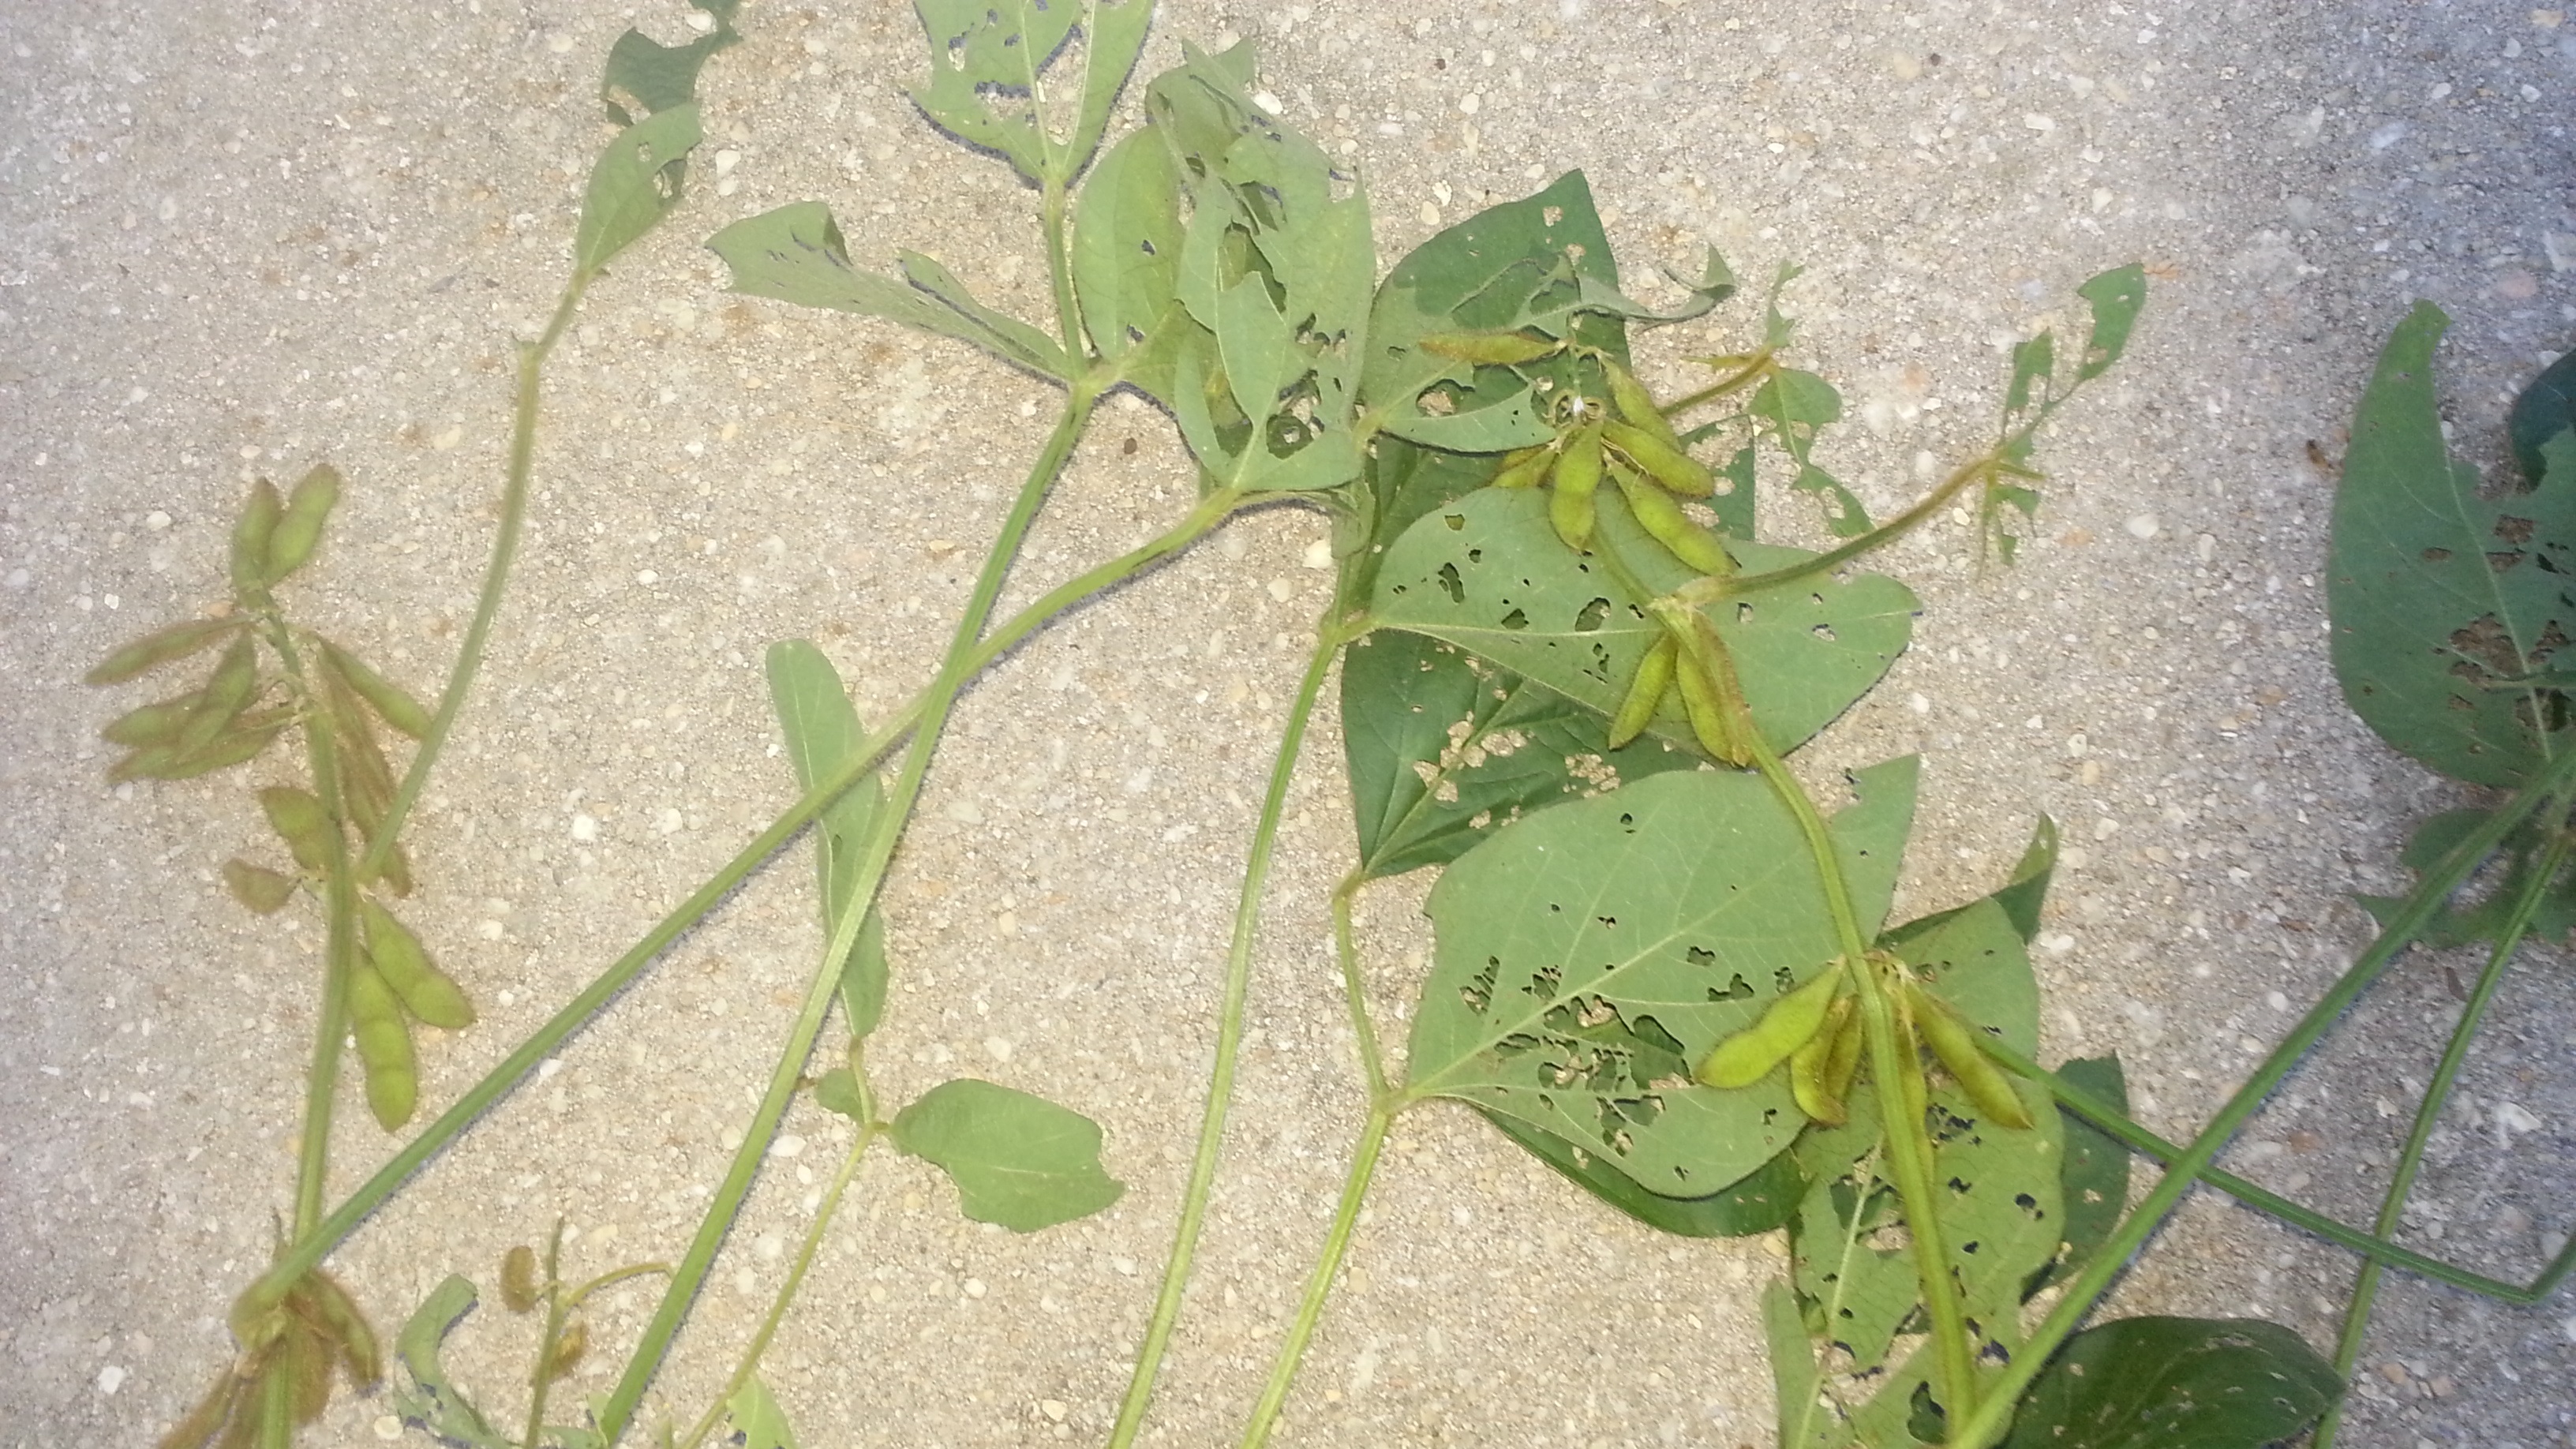 Example of a soybean plant being eaten by grasshoppers